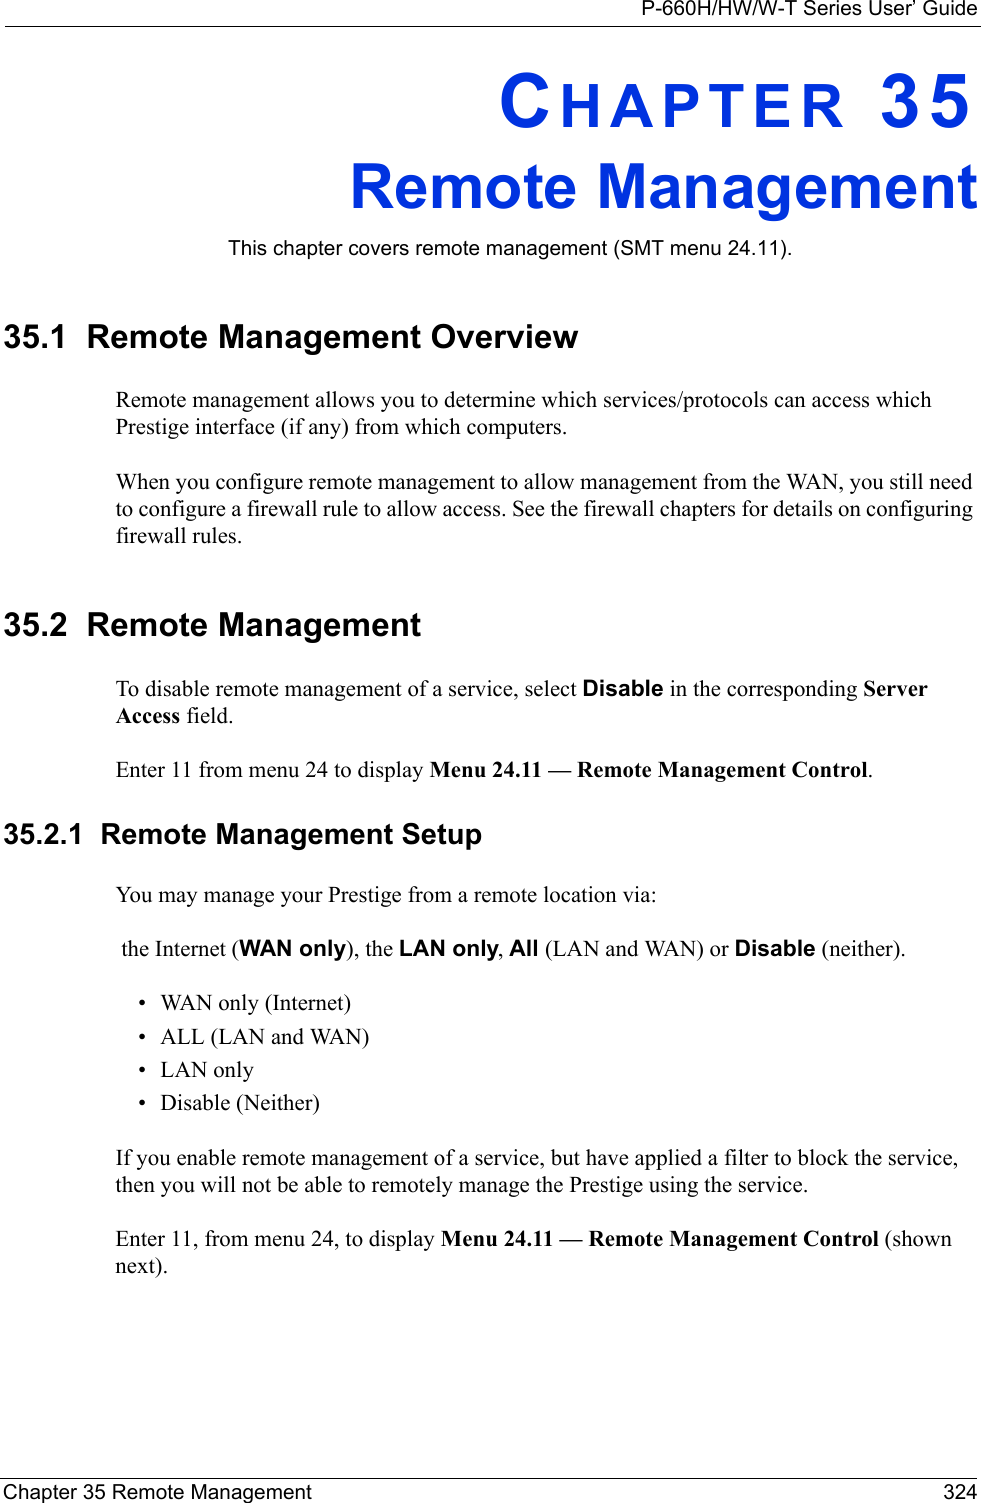 P-660H/HW/W-T Series User’ GuideChapter 35 Remote Management 324CHAPTER 35Remote ManagementThis chapter covers remote management (SMT menu 24.11).35.1  Remote Management OverviewRemote management allows you to determine which services/protocols can access which Prestige interface (if any) from which computers.When you configure remote management to allow management from the WAN, you still need to configure a firewall rule to allow access. See the firewall chapters for details on configuring firewall rules.35.2  Remote ManagementTo disable remote management of a service, select Disable in the corresponding Server Access field.Enter 11 from menu 24 to display Menu 24.11 — Remote Management Control. 35.2.1  Remote Management SetupYou may manage your Prestige from a remote location via: the Internet (WAN only), the LAN only, All (LAN and WAN) or Disable (neither).• WAN only (Internet)• ALL (LAN and WAN)• LAN only• Disable (Neither)If you enable remote management of a service, but have applied a filter to block the service, then you will not be able to remotely manage the Prestige using the service.Enter 11, from menu 24, to display Menu 24.11 — Remote Management Control (shown next). 